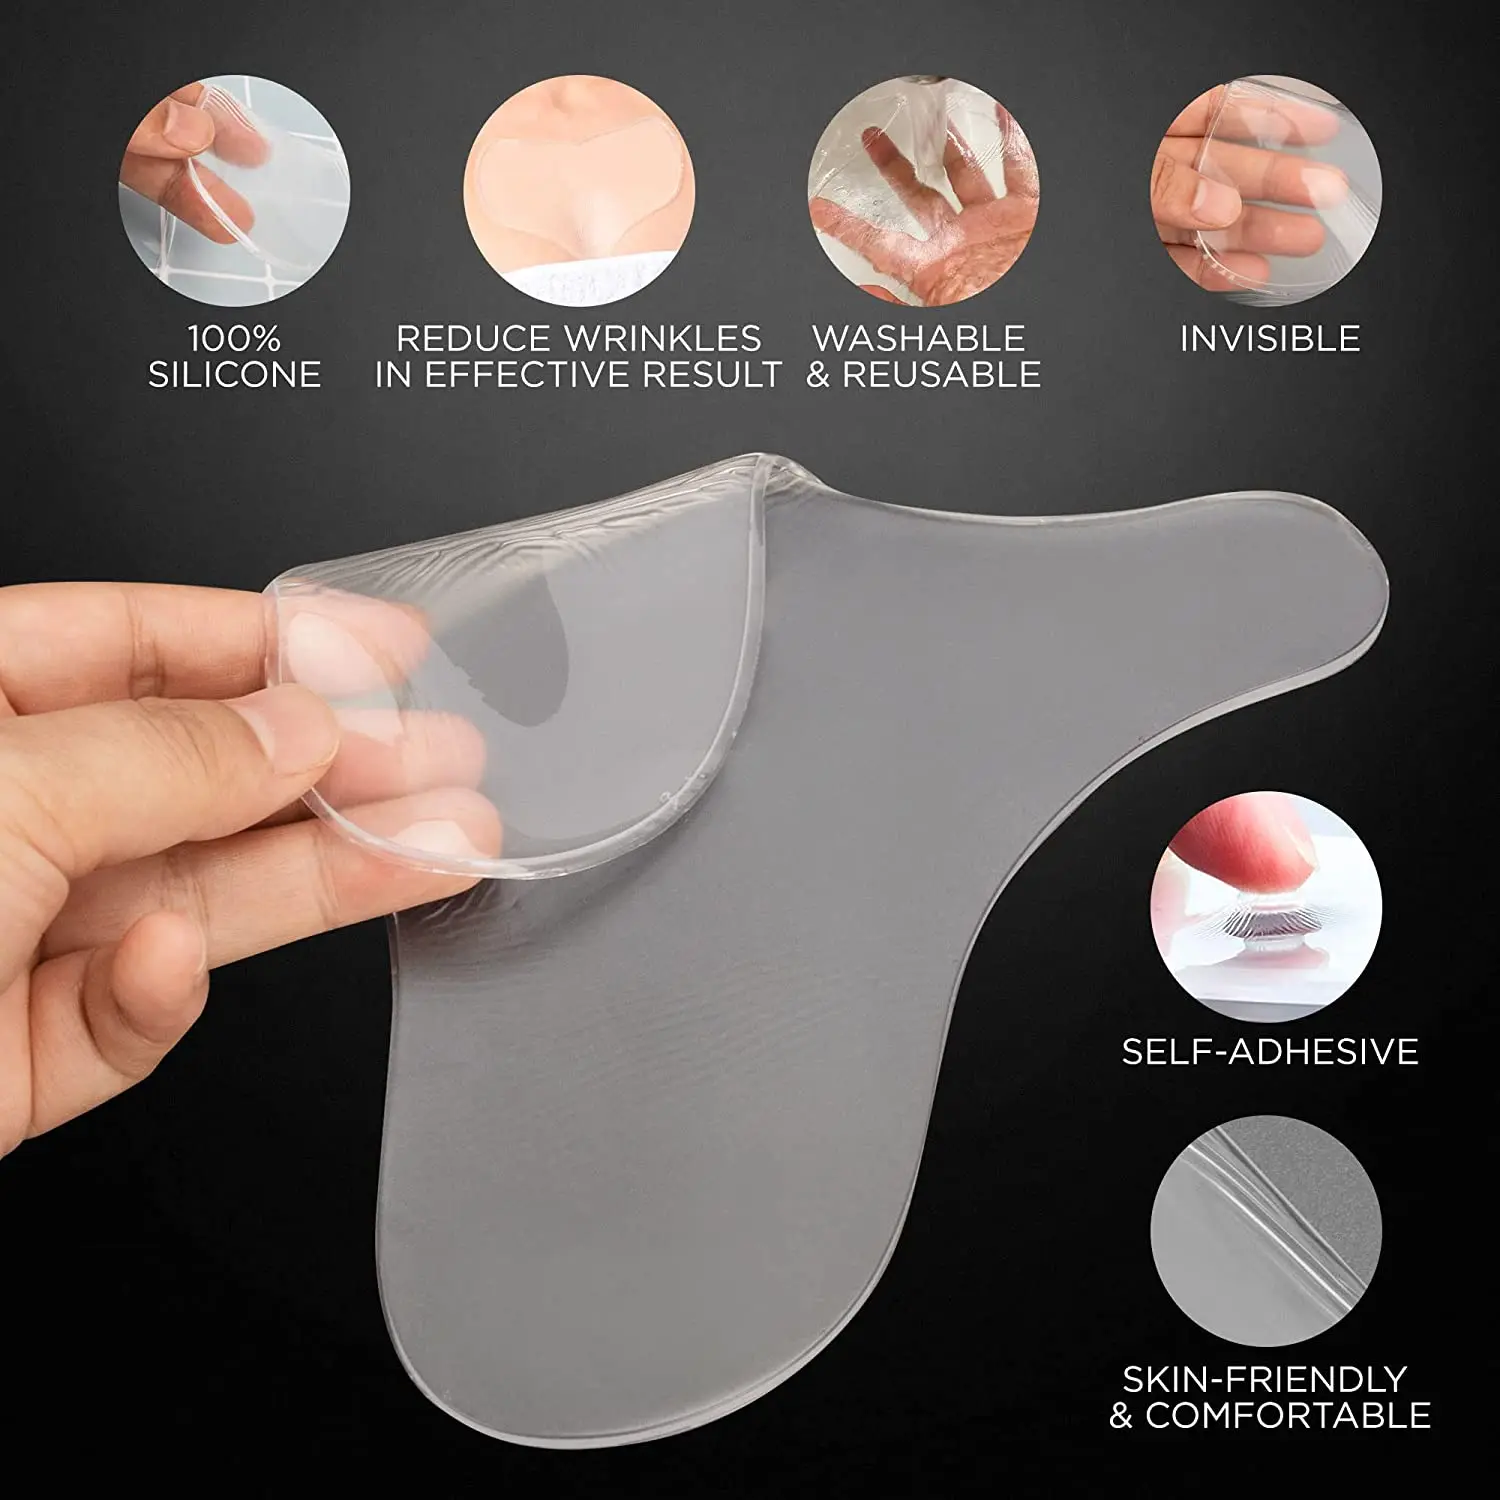 Reusable Silicone Wrinkle Removal Chest skin face Sticker Pad Anti Wrinkle Aging Skin Lifting Care Patch